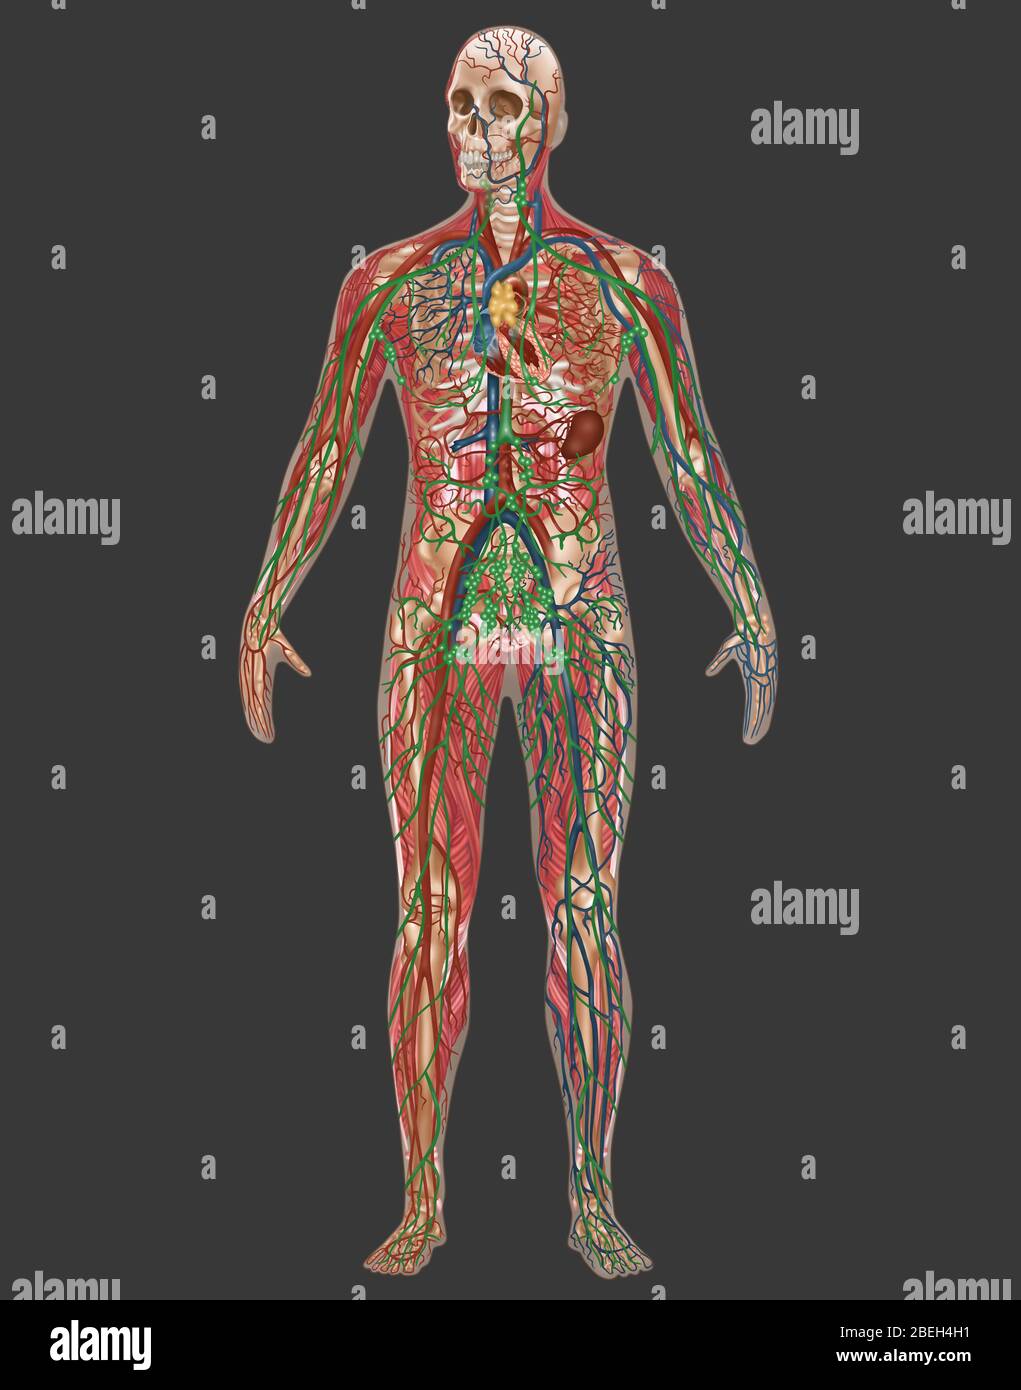 Male Anatomy Of The Body / Anatomical Board Region Of A Human Body